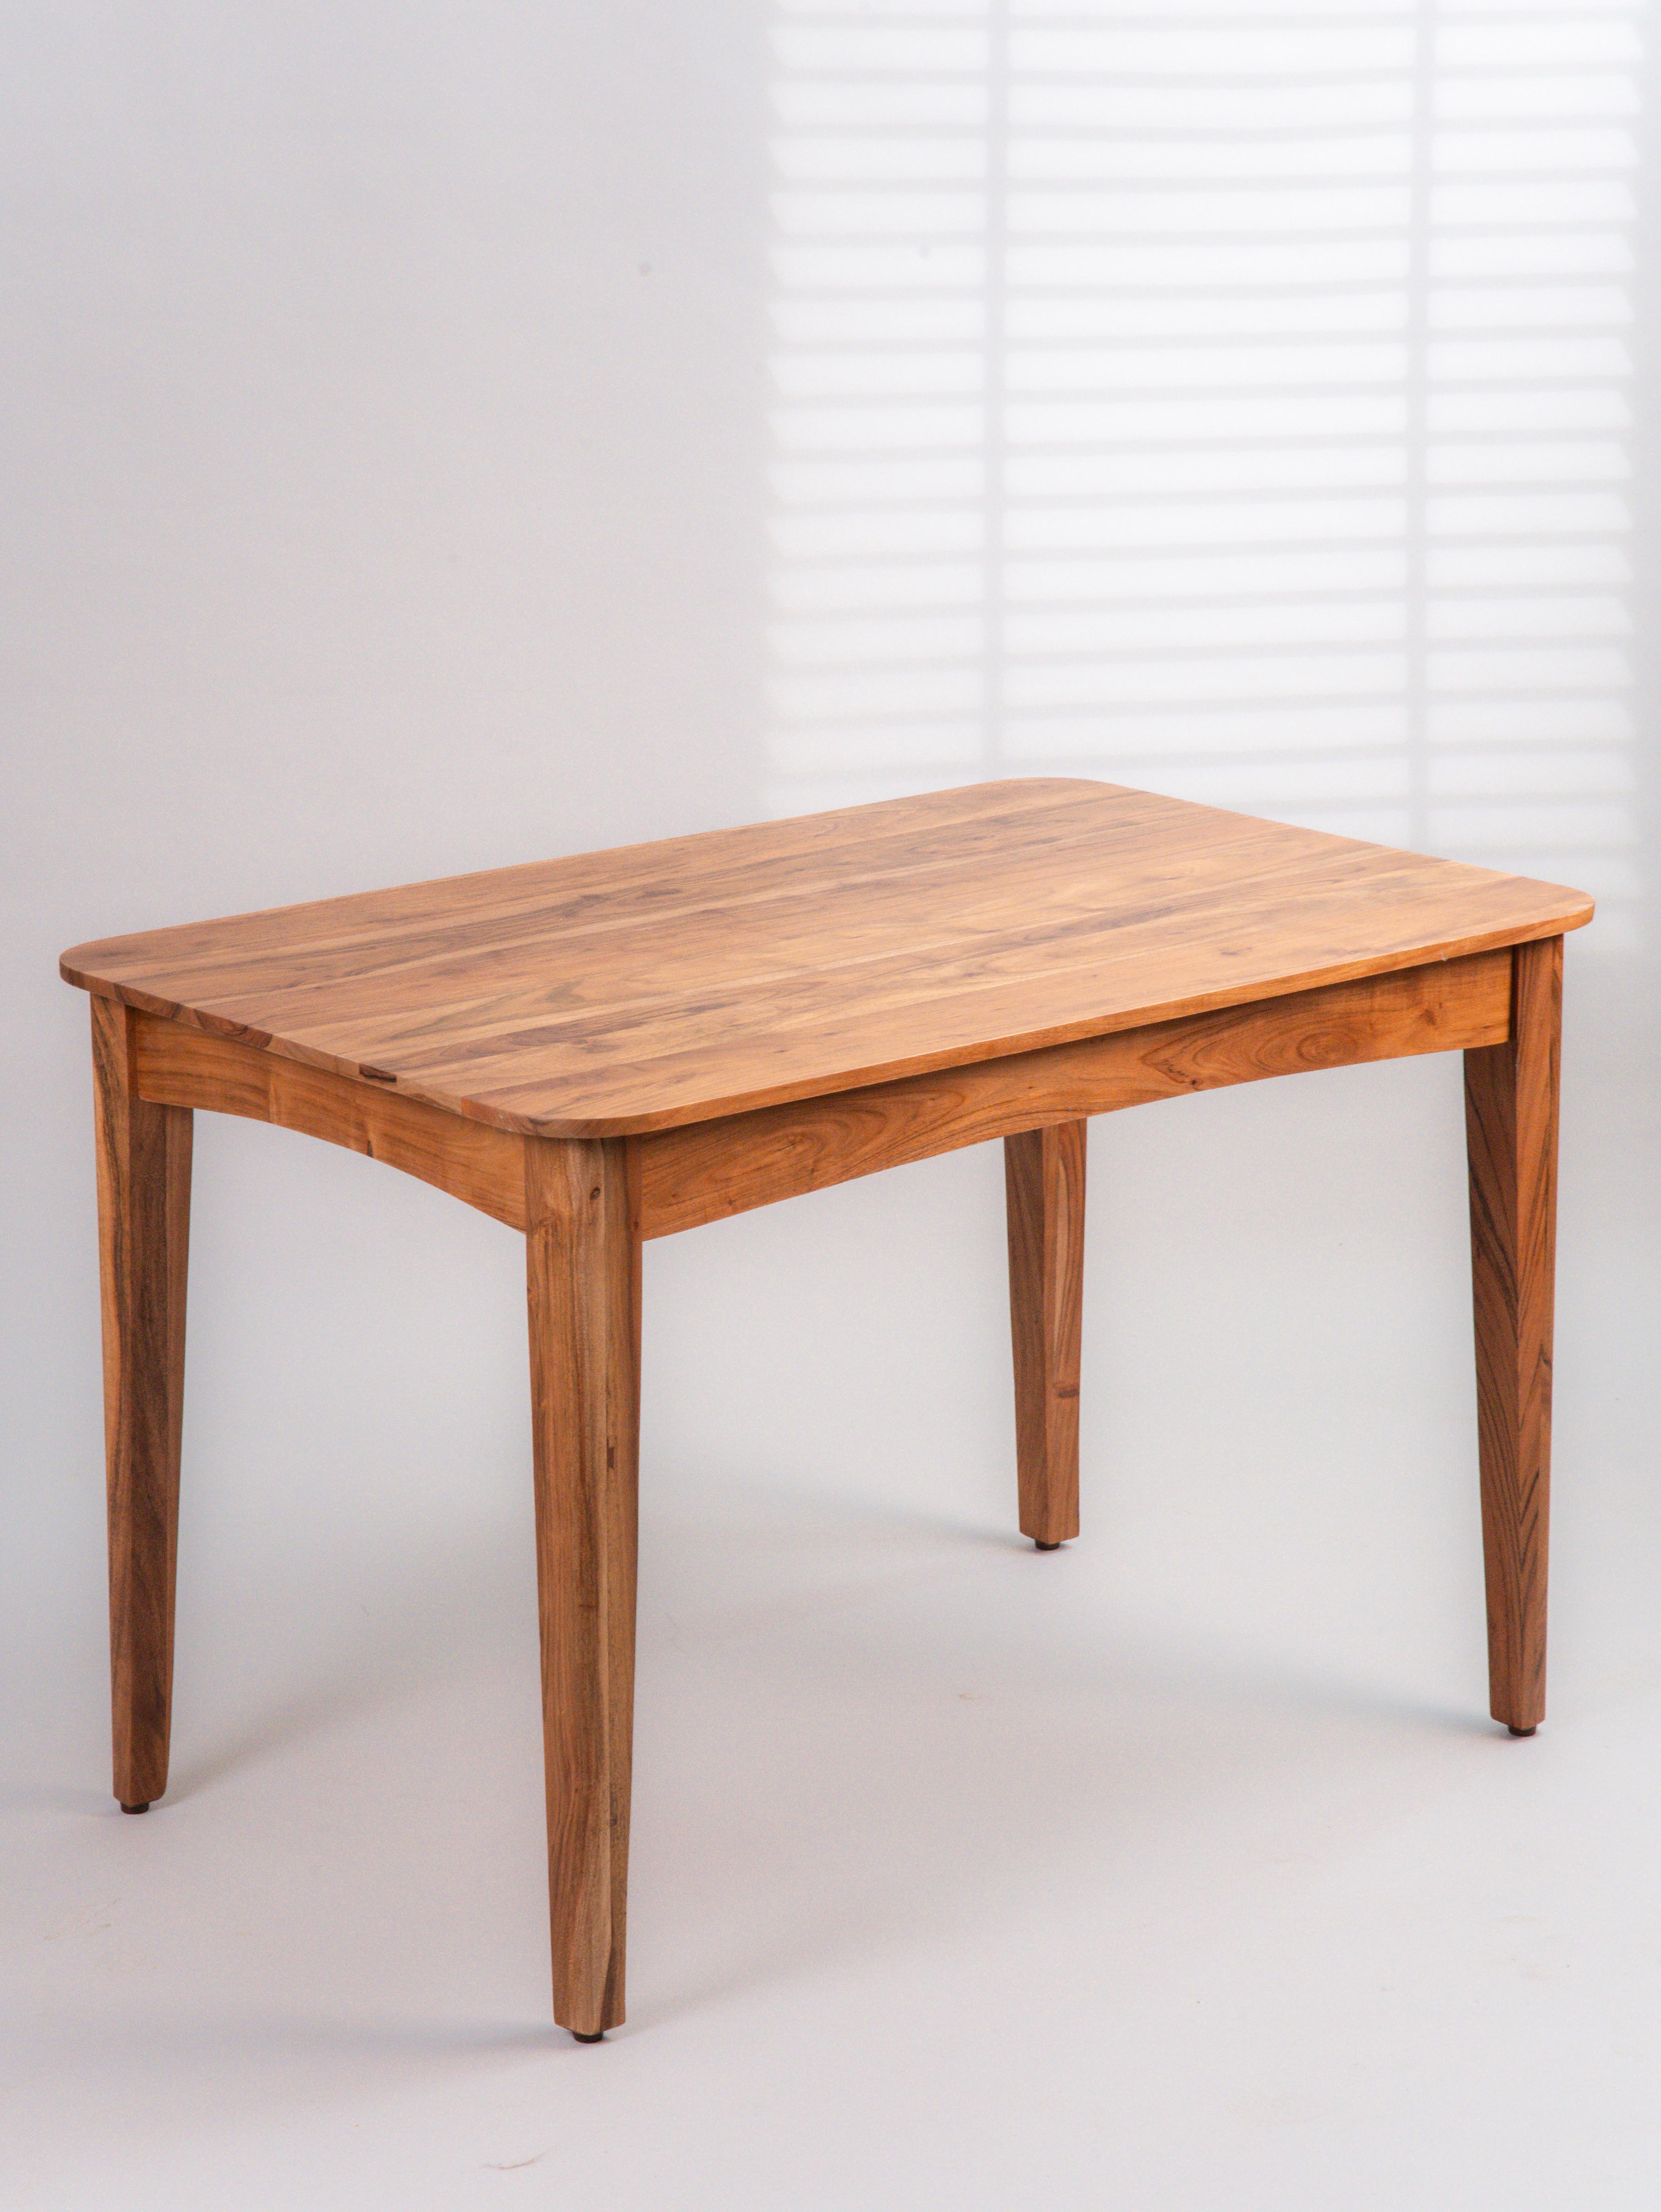 Fremont Solid Wood Dining Table (39")